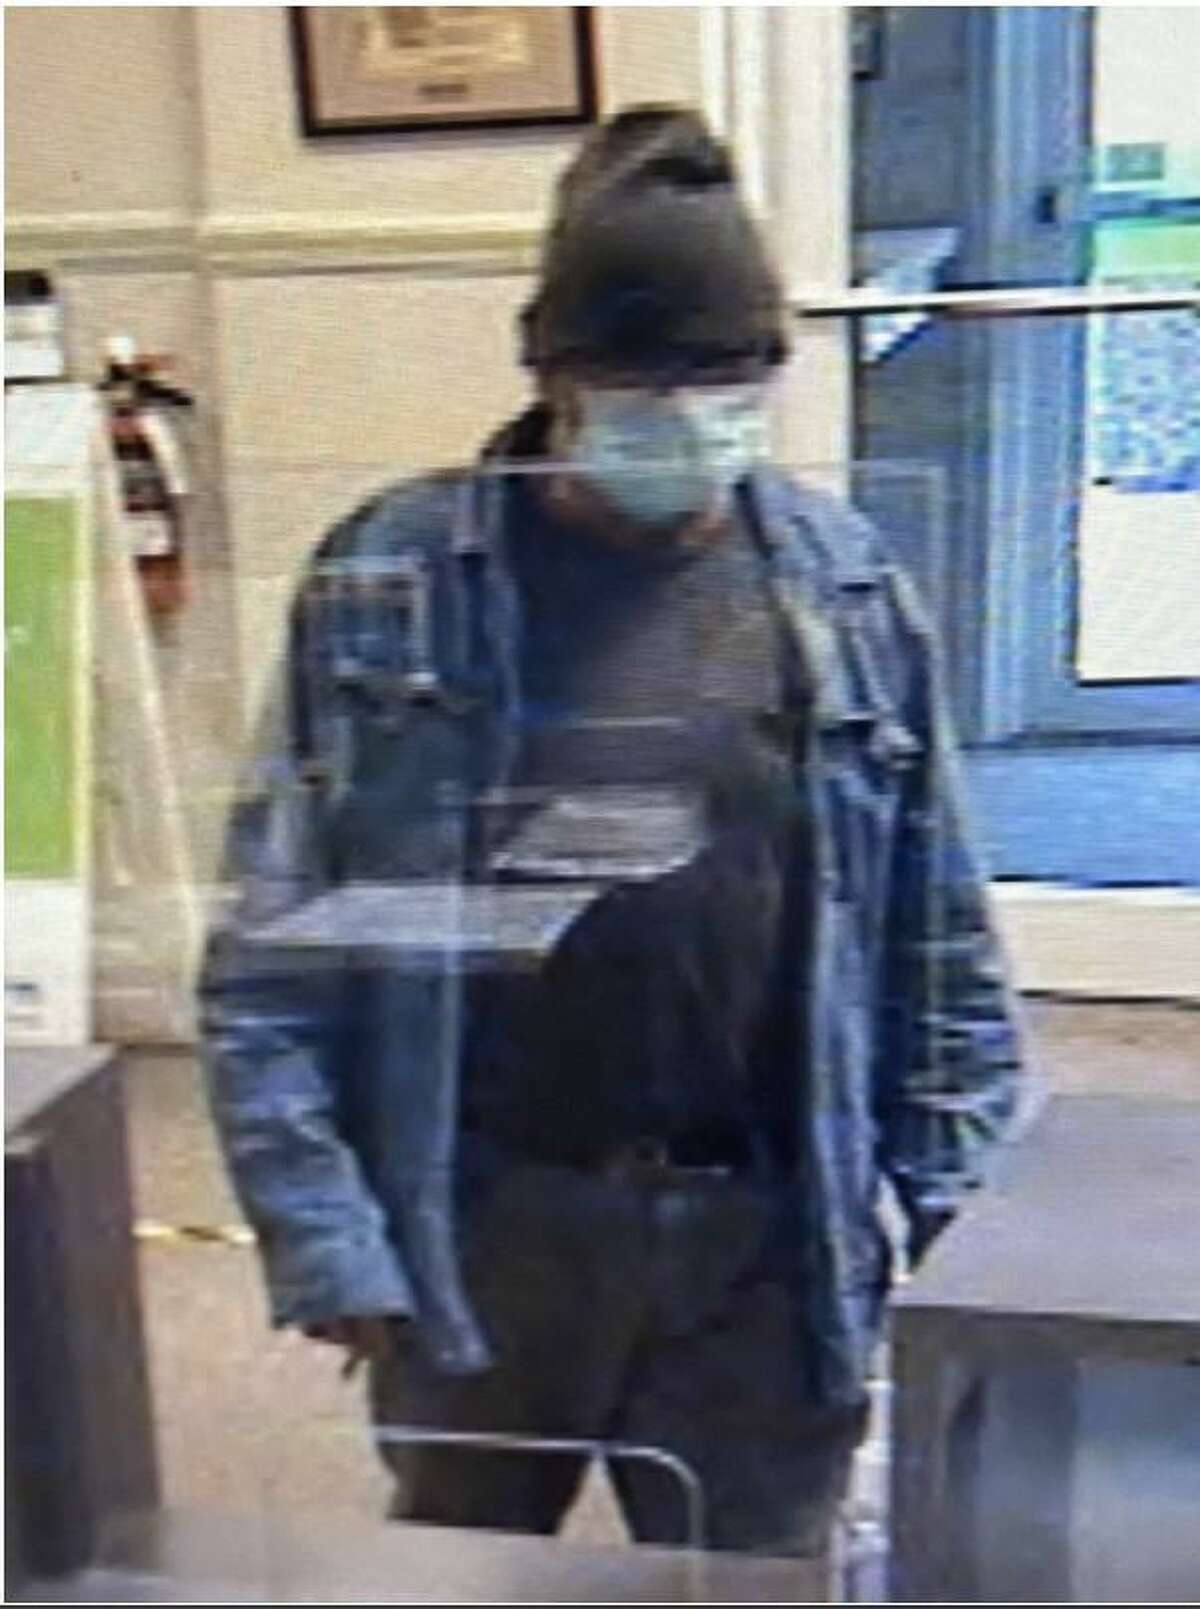 State police said this man robbed a bank in Griswold, Conn. on Monday, Jan. 21 2022, using a note, and fled with an undisclosed amount of money. State police are asking for the public to help identify him.